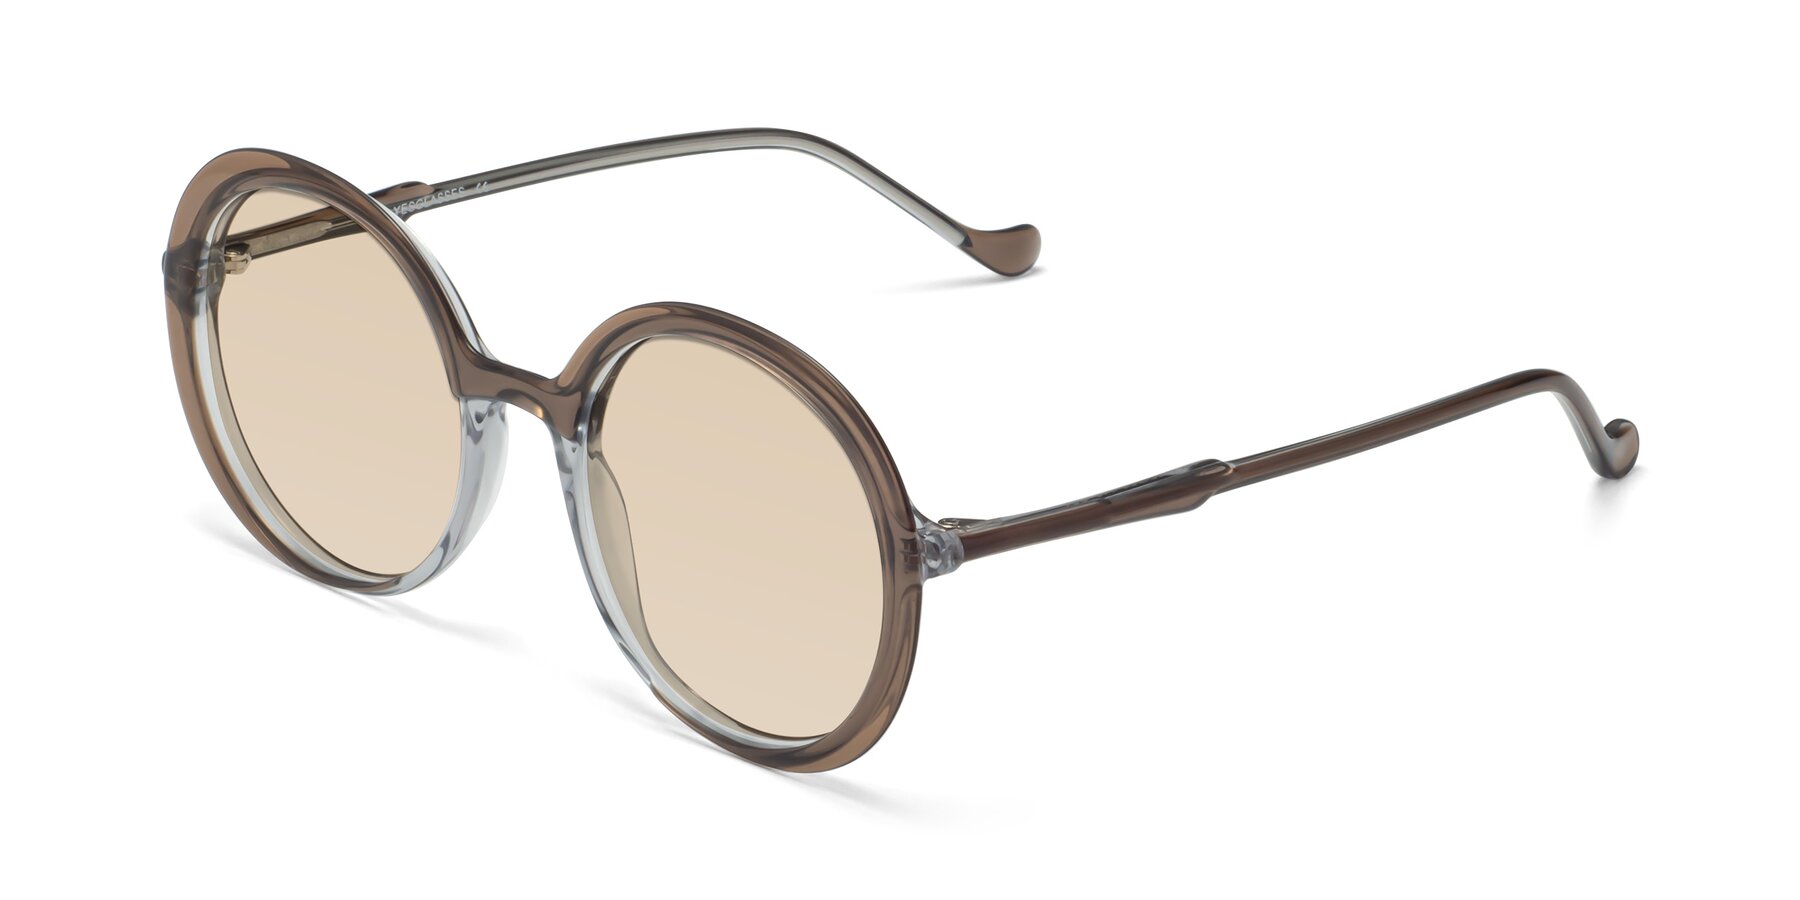 Angle of 1471 in Brown with Light Brown Tinted Lenses